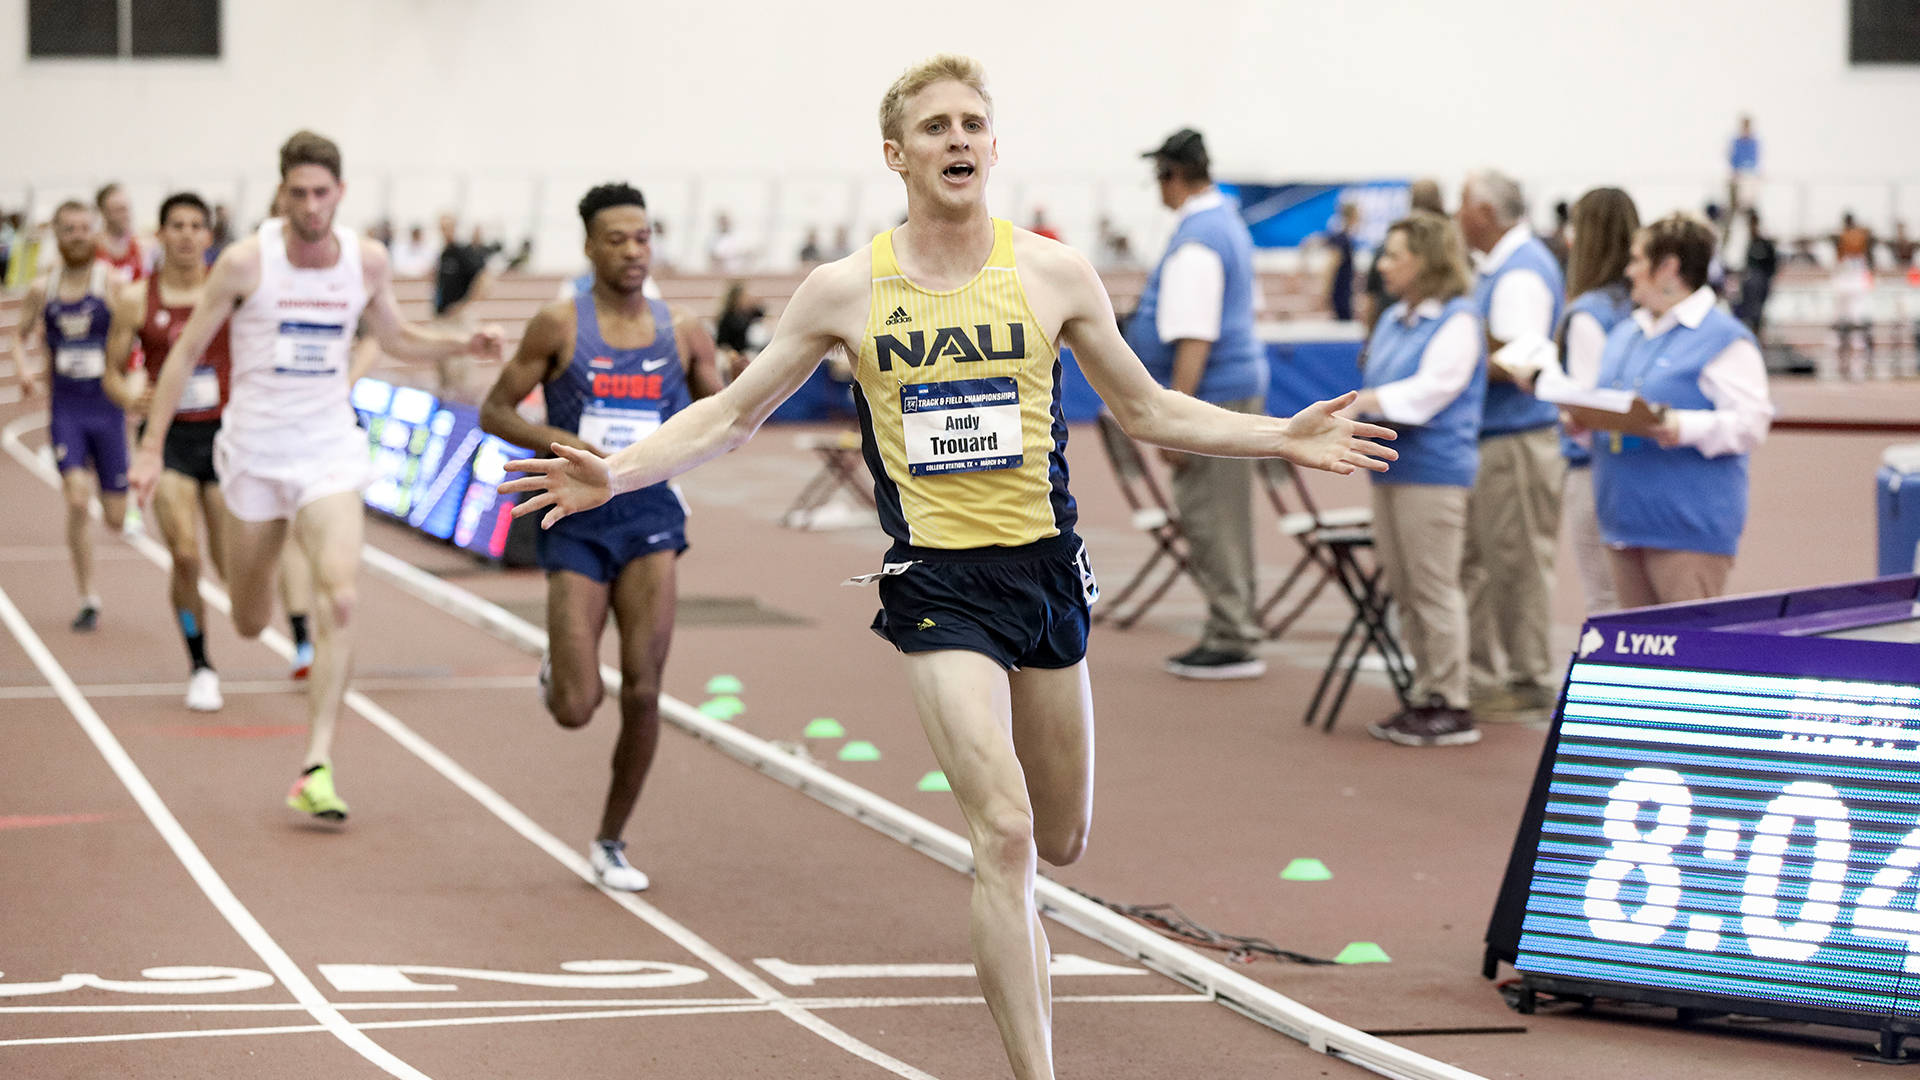 Going the distance NAU runner takes top prize in 3000M run at indoor